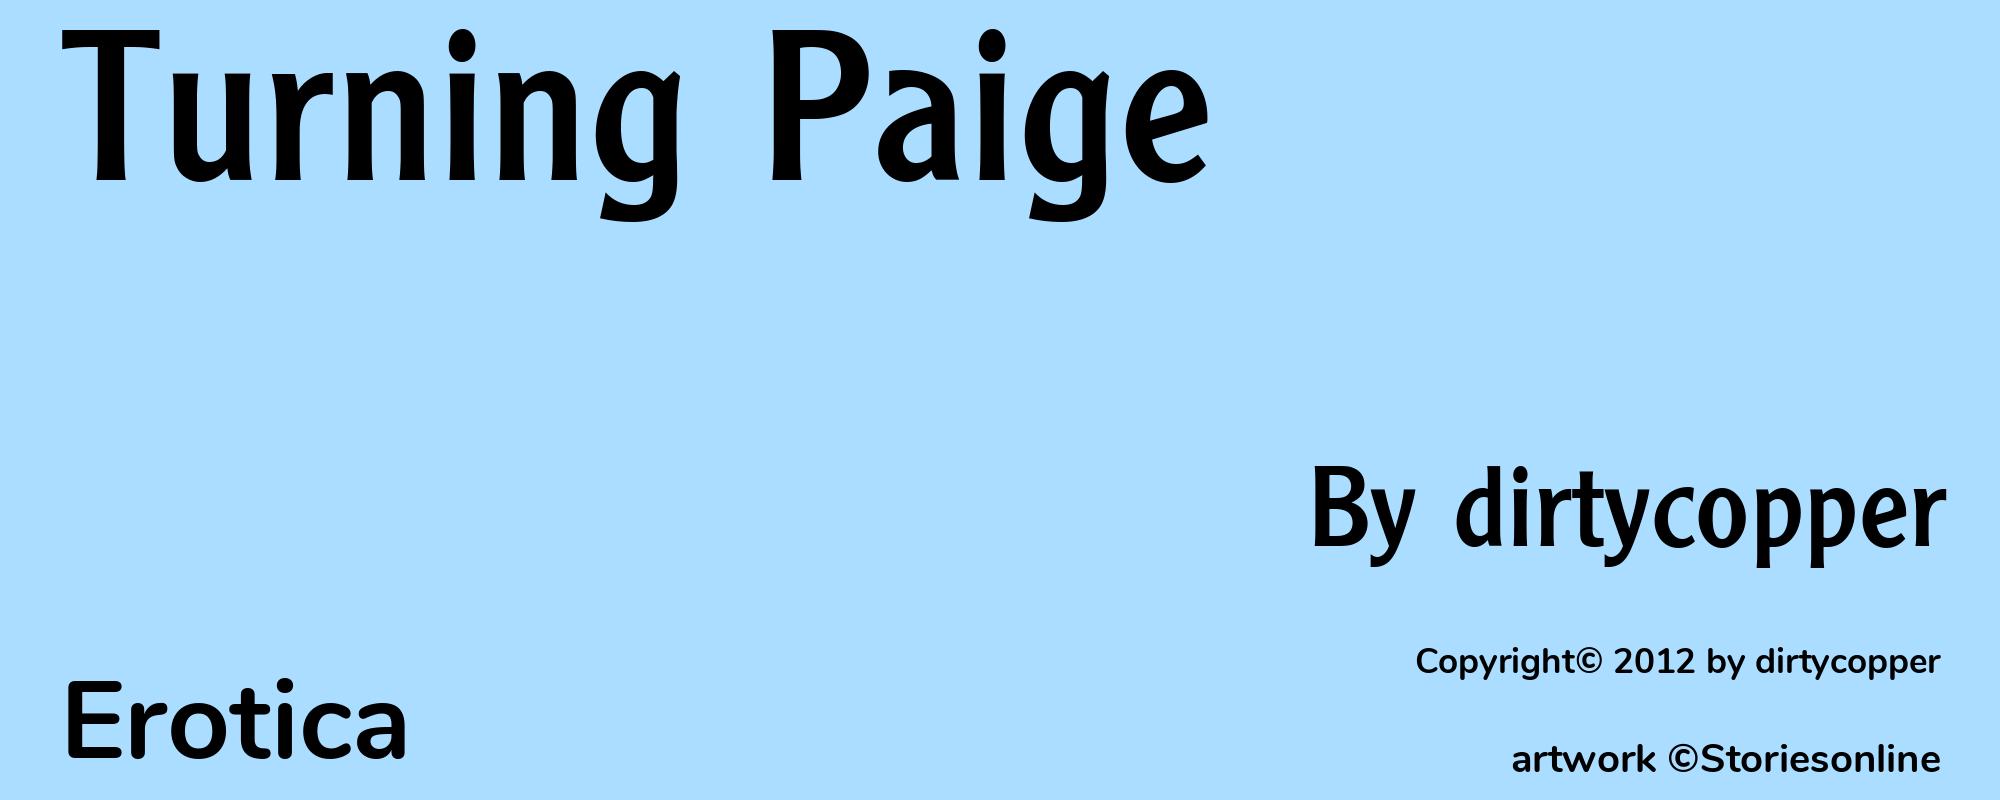 Turning Paige - Cover